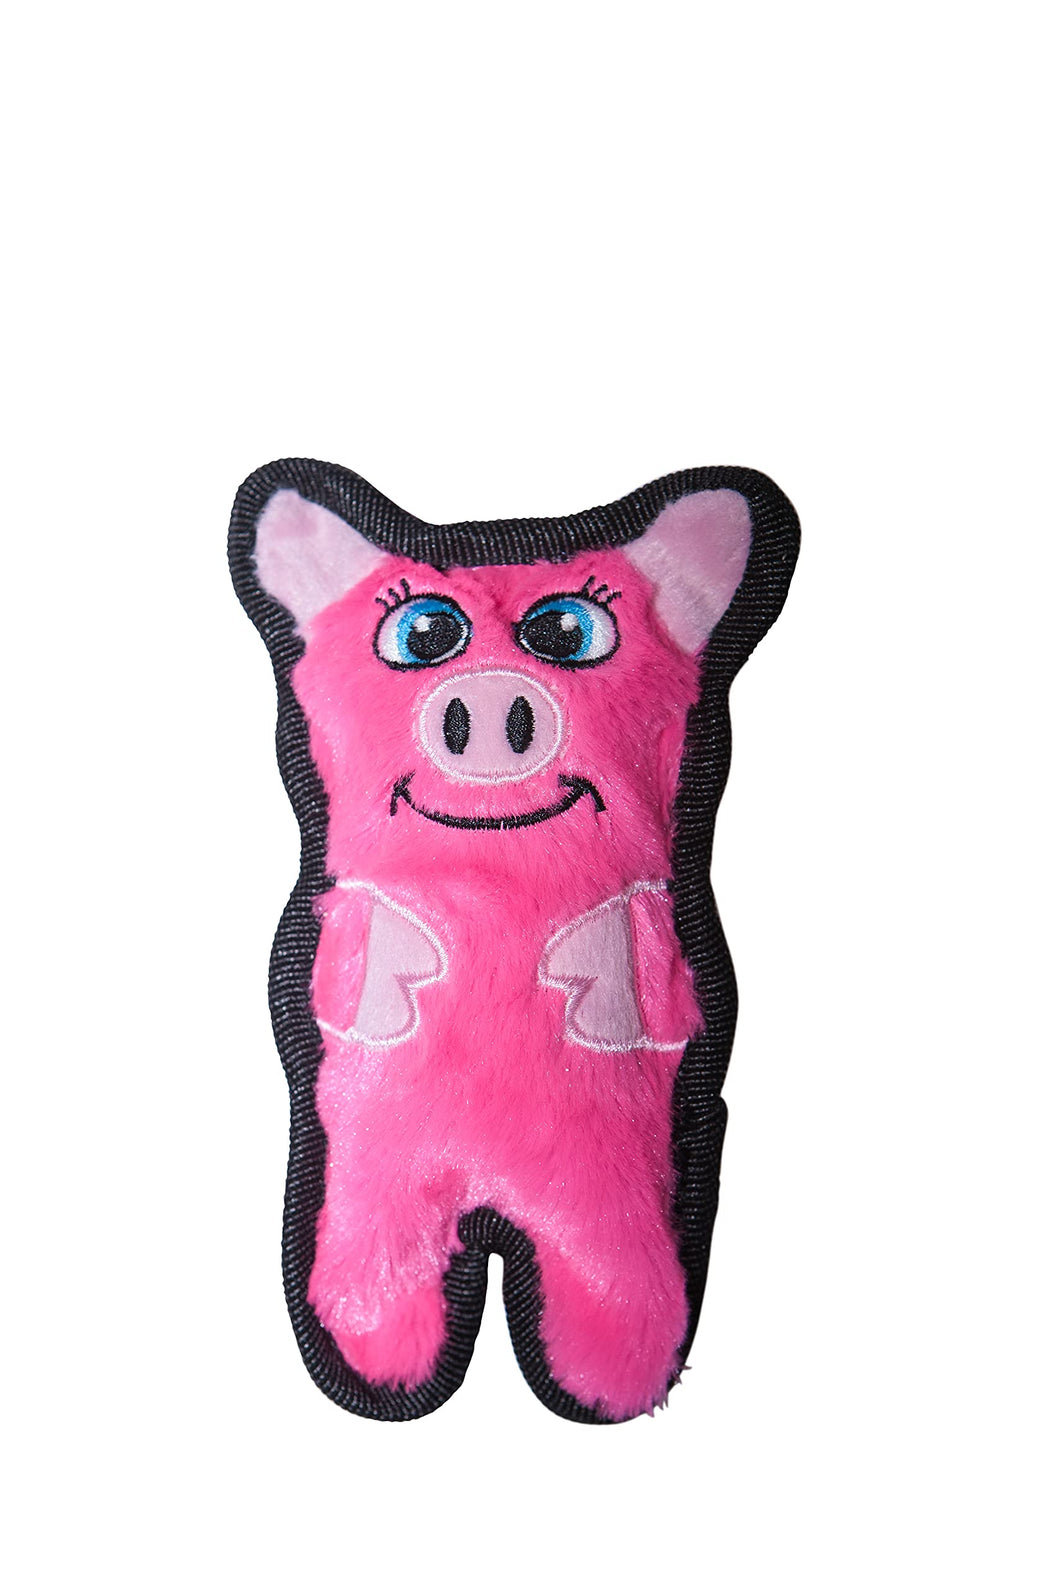 Invincibles Pig - Sassy Dogs Boutique